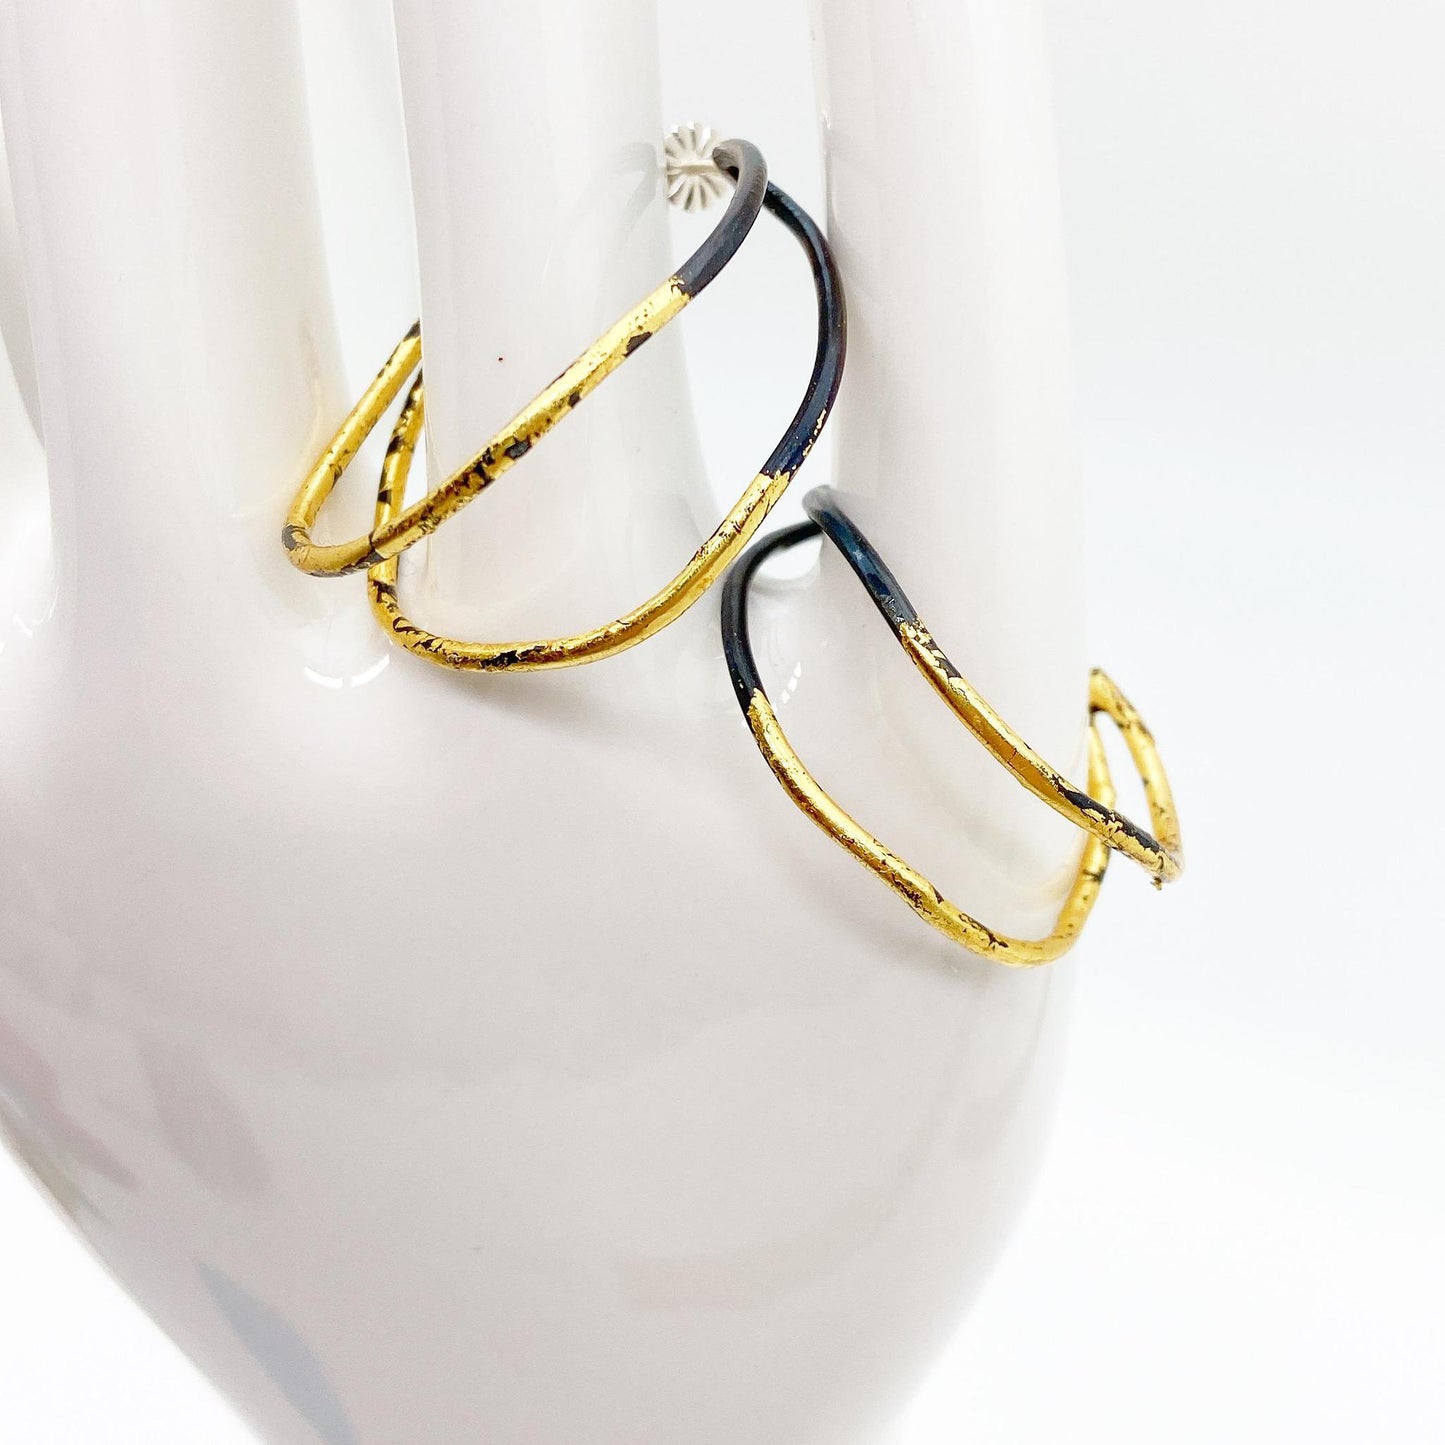 Earrings - Double Semi-Circles in Blackened Steel with 23kt Gold